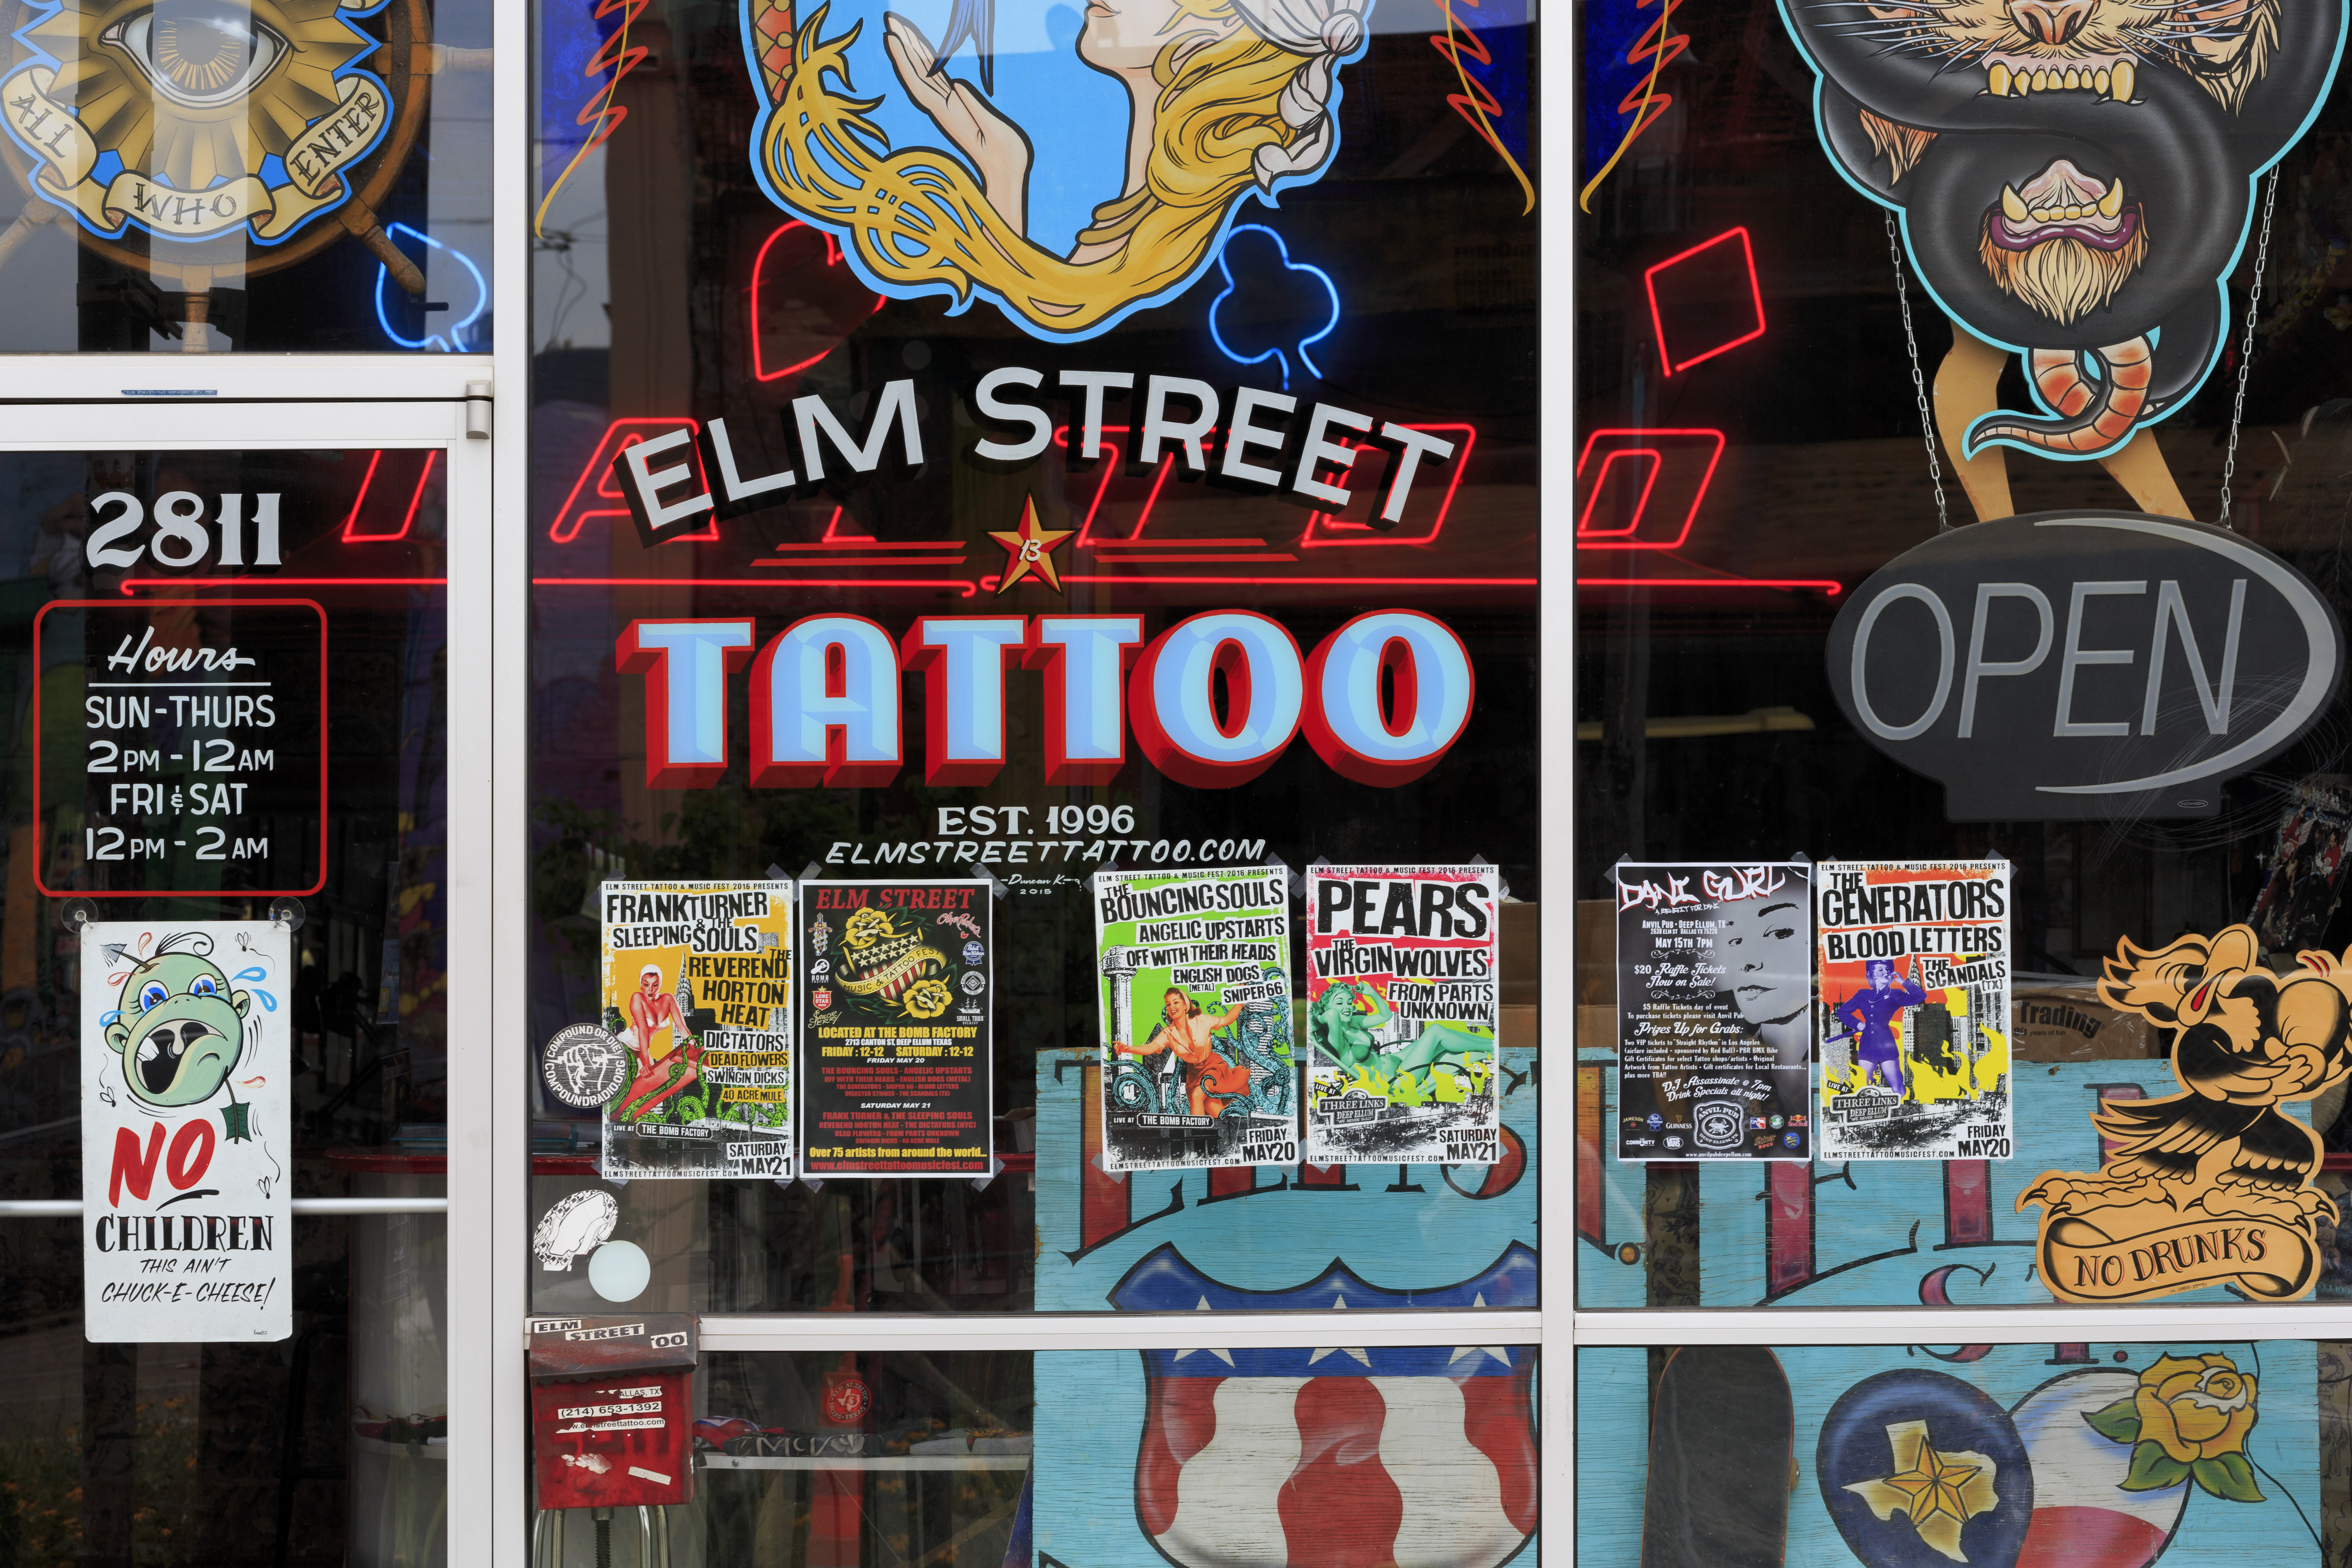 Where To Get Inked On Friday The 13th